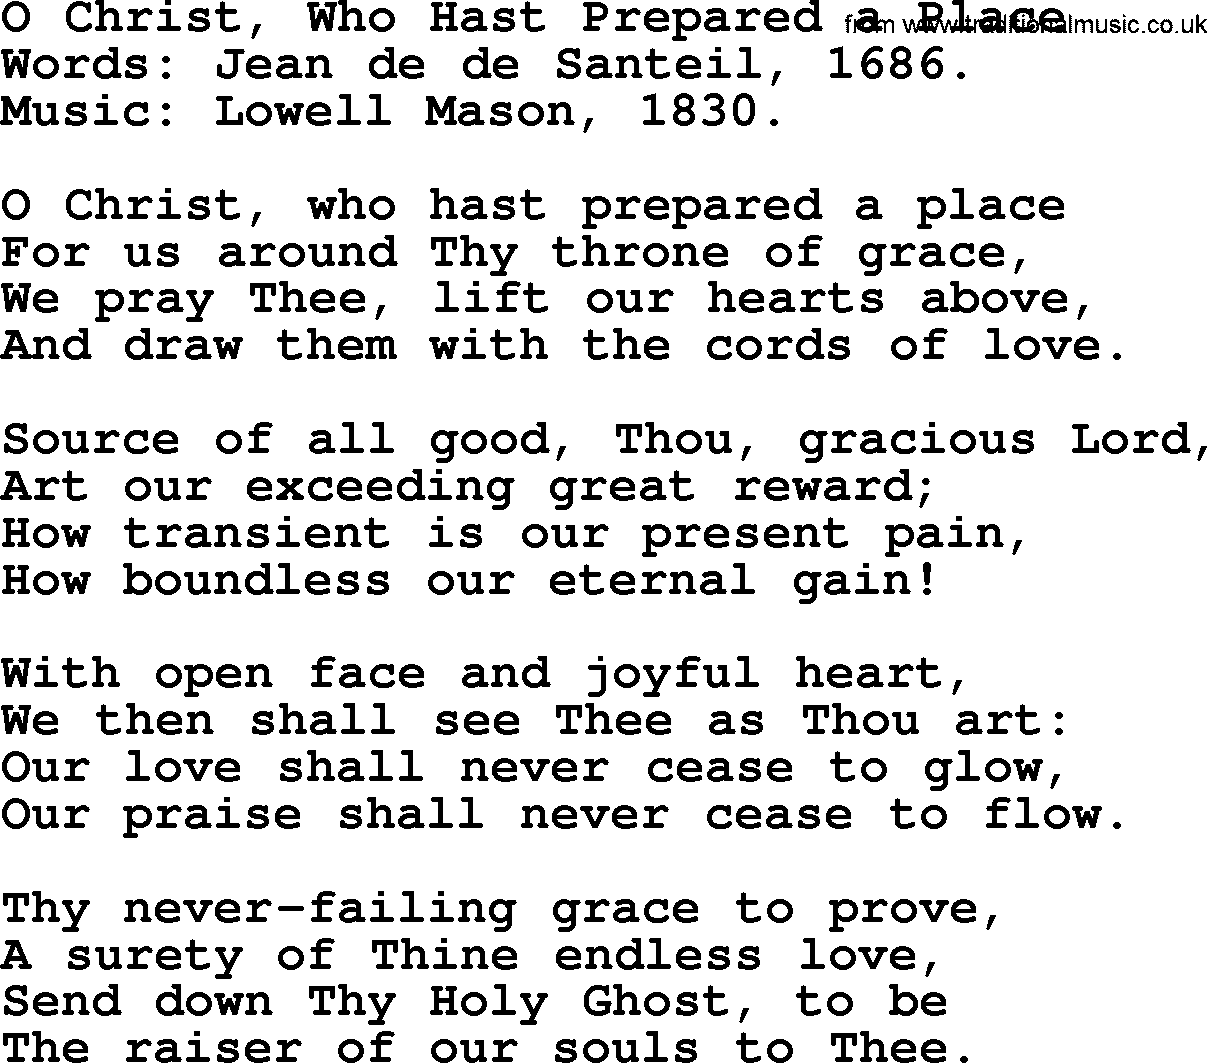 Ascensiontide Hynms collection, Hymn: O Christ, Who Hast Prepared A Place, lyrics and PDF